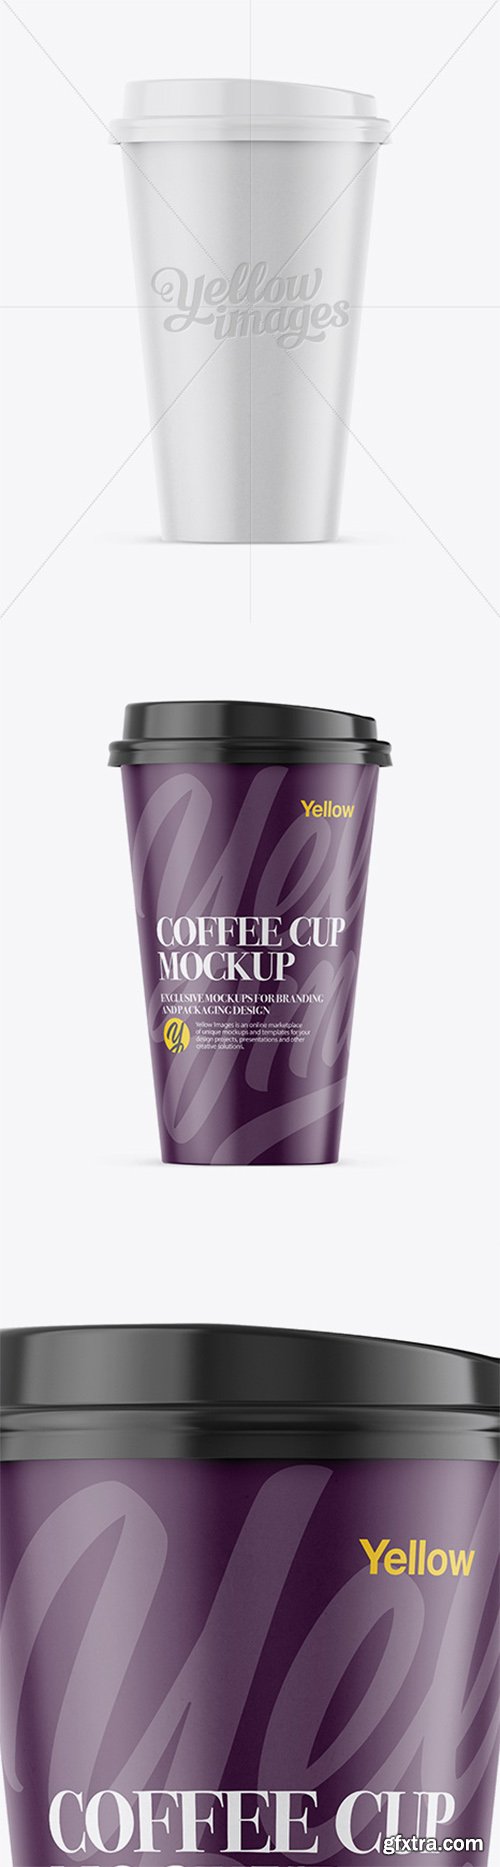 Coffee Cup Mockup - Front View 19275